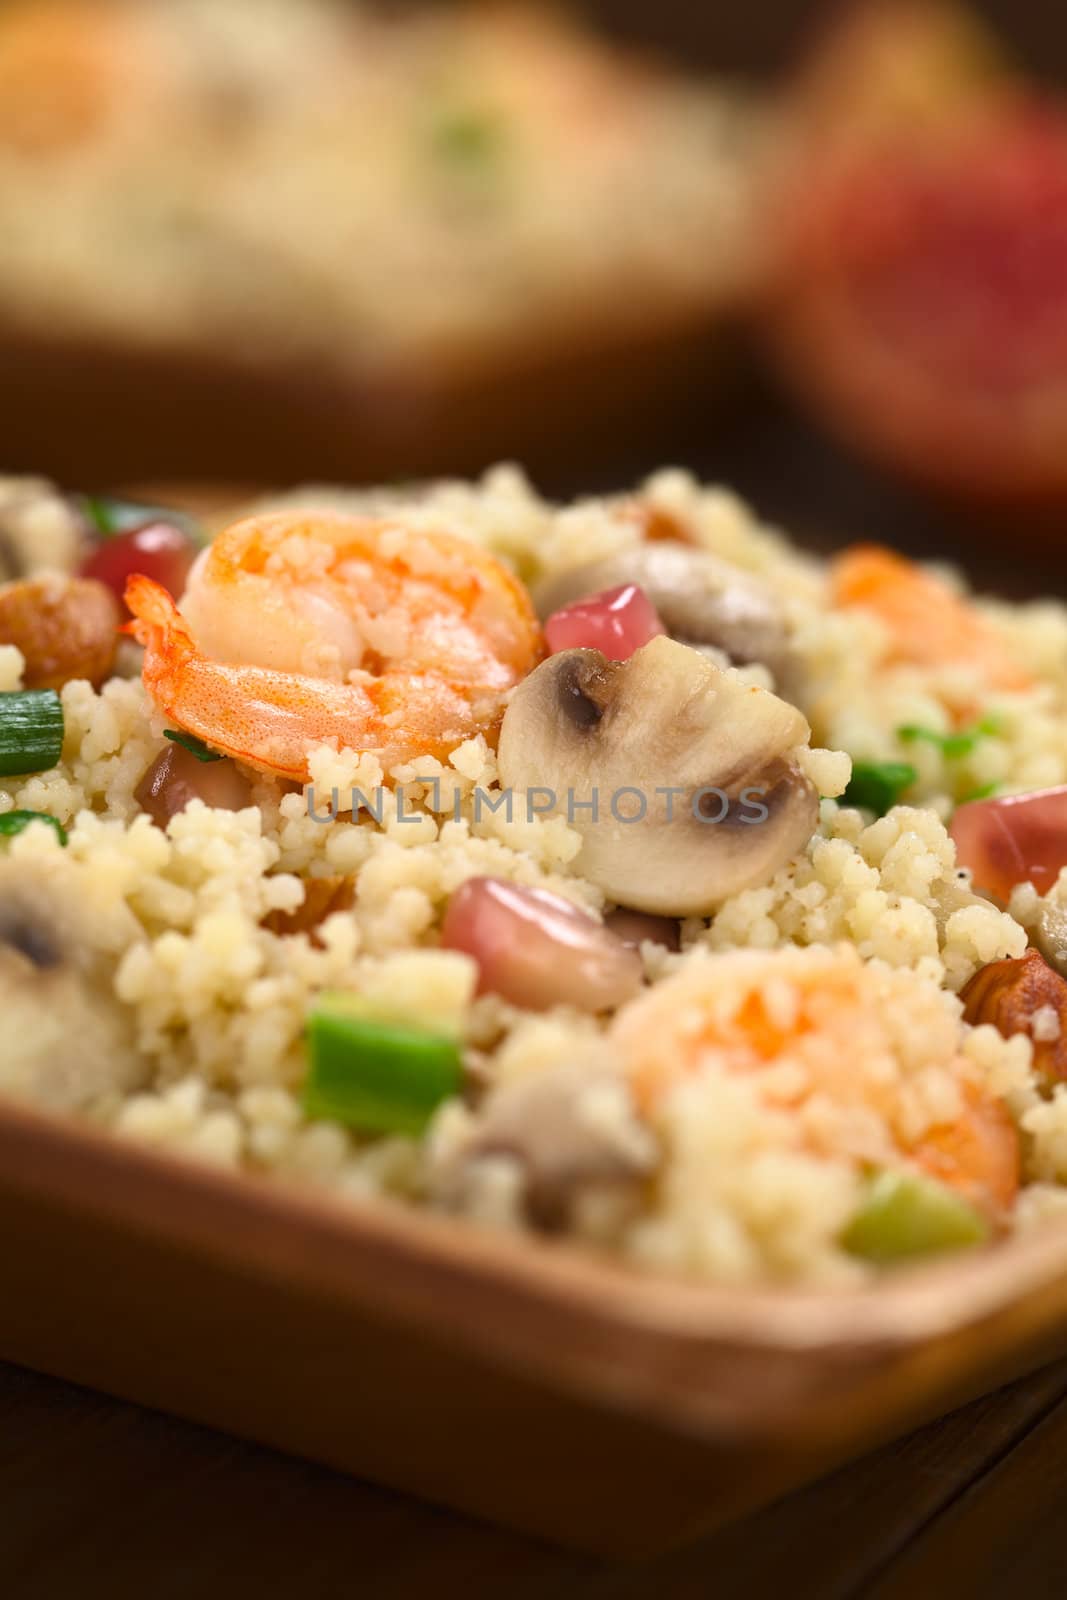 Couscous with Shrimp, Mushroom, Almond and Pomegranate by ildi